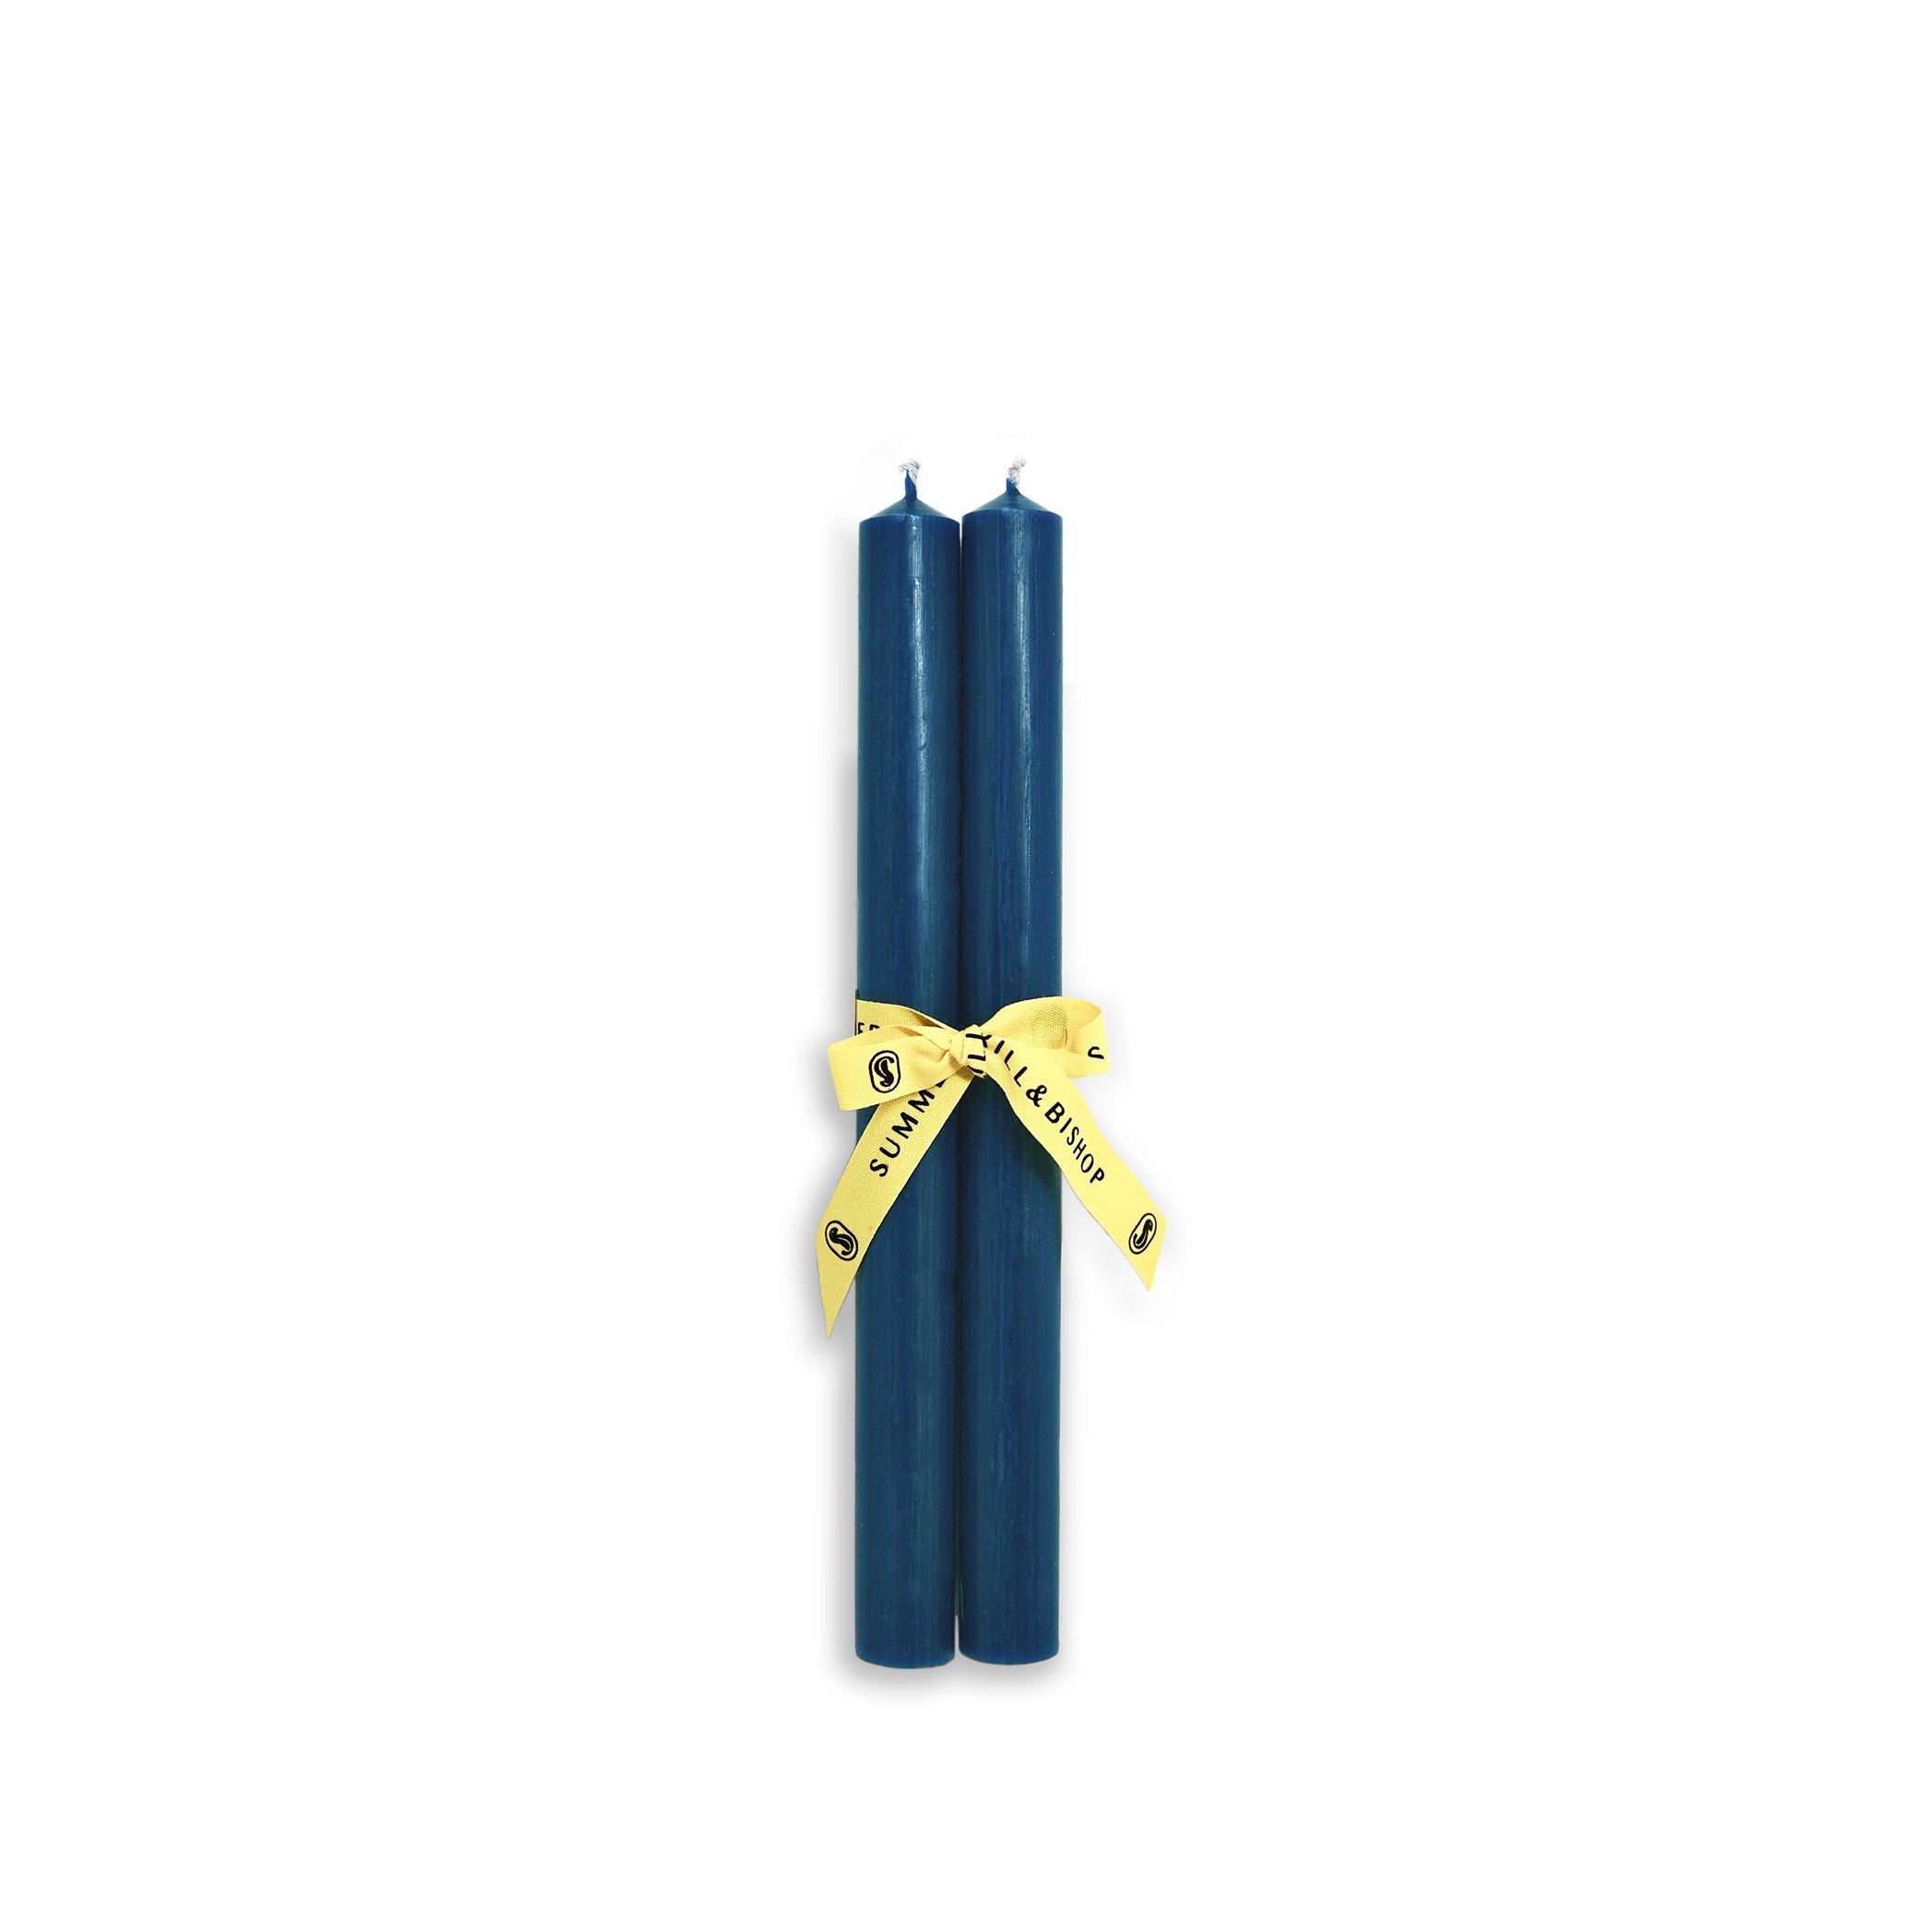 Pair of Coloured Church Candles in Bedruthan Blue